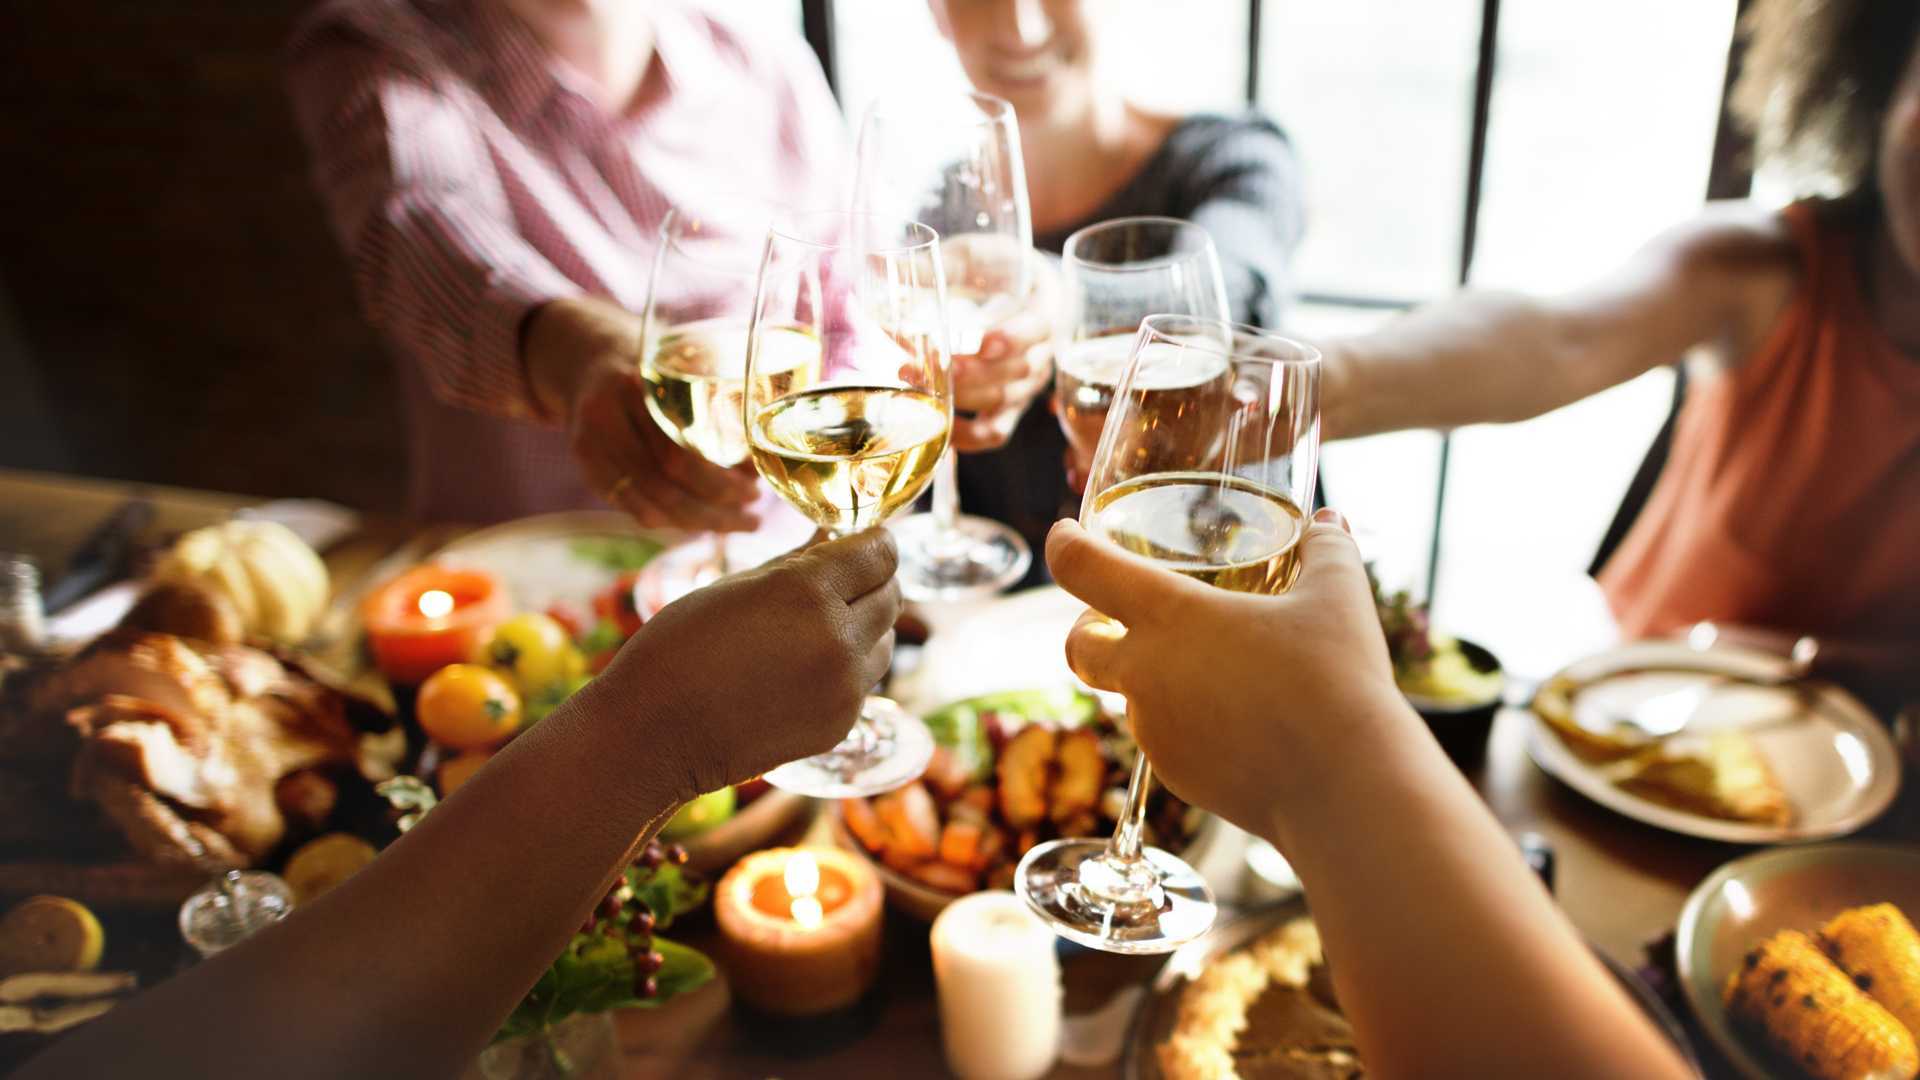 Dinner party and restaurant etiquette examples | People cheersing